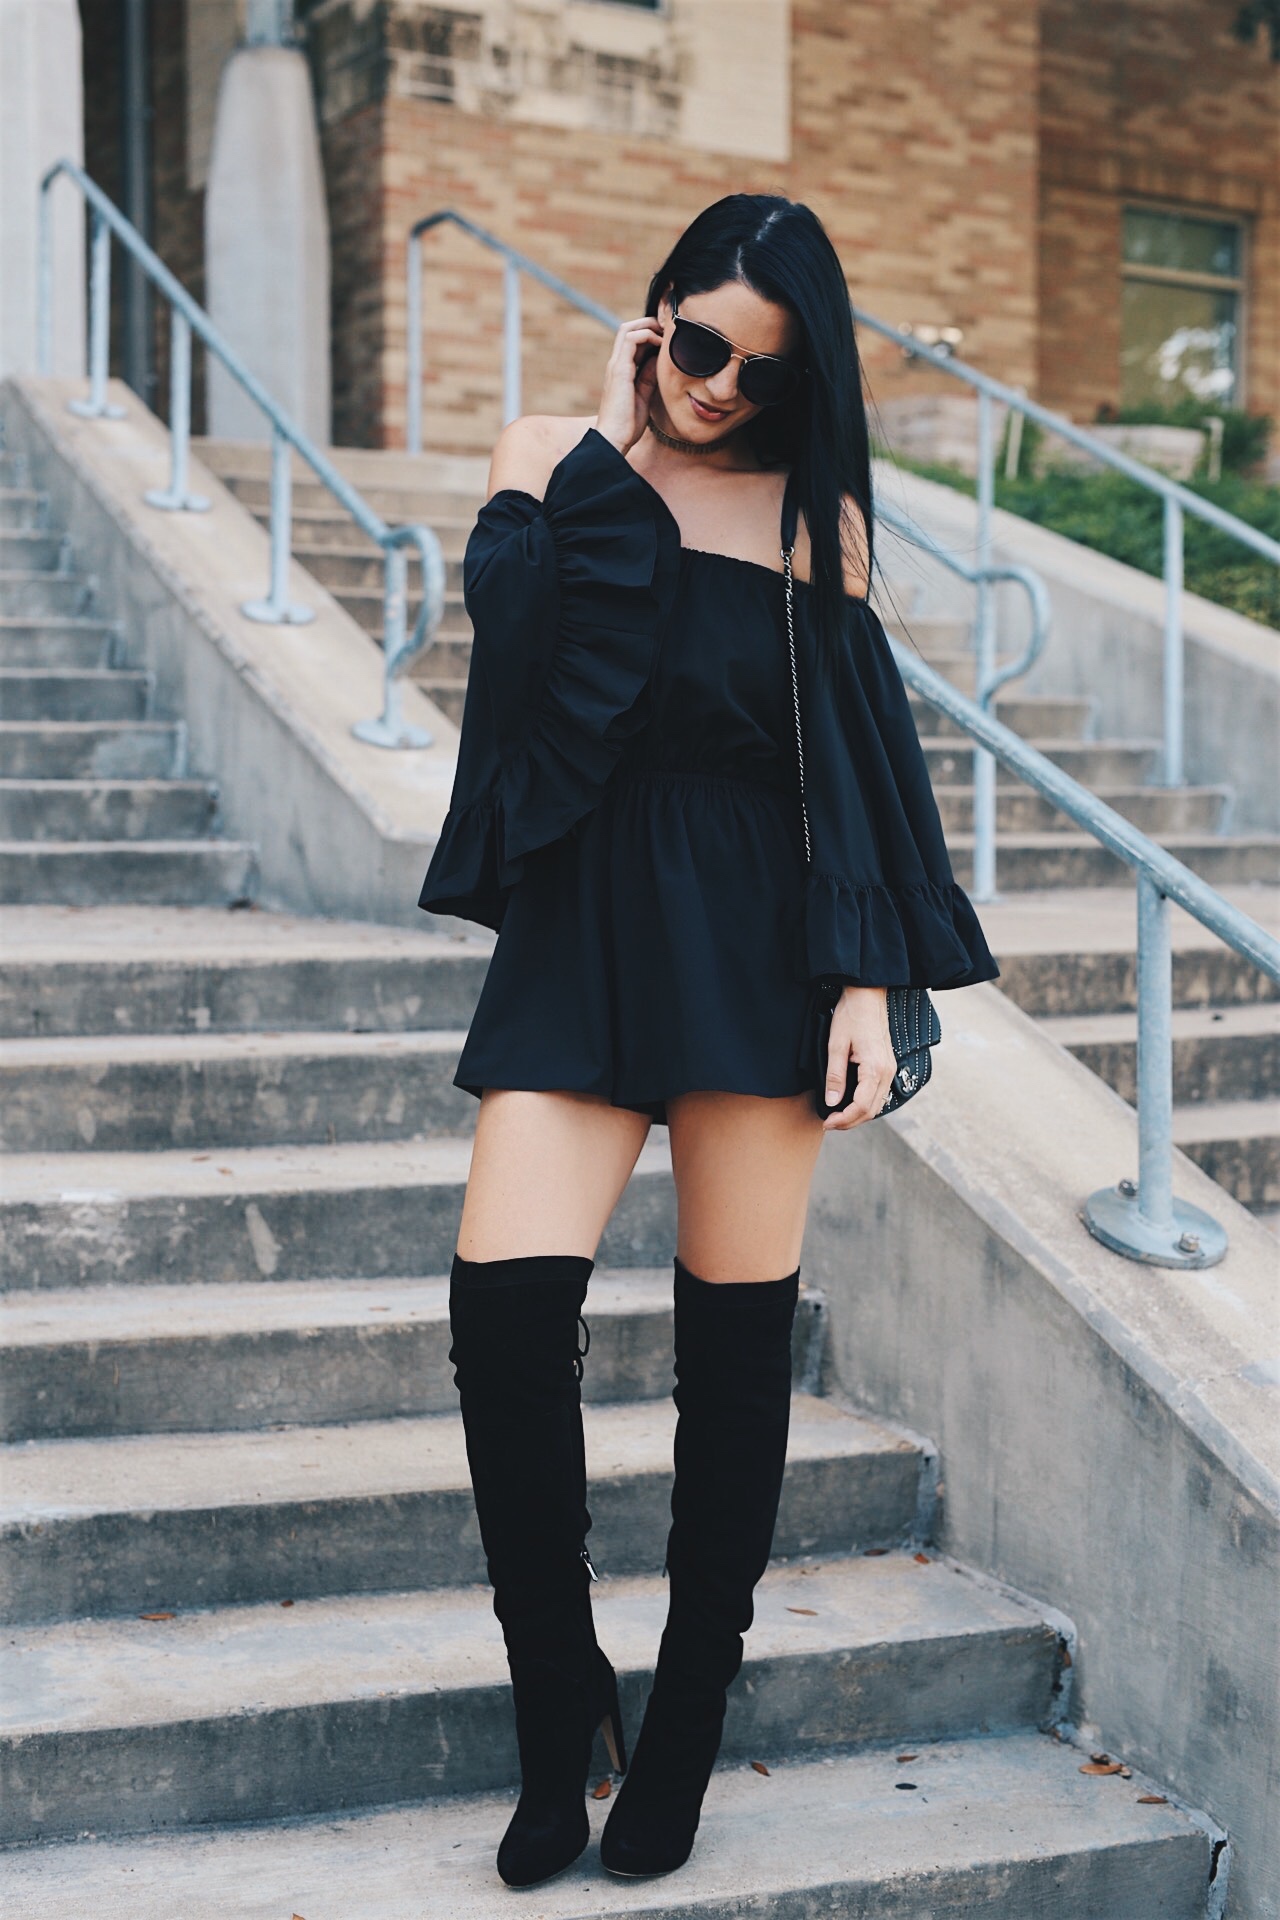 Knee-High Boots with Rompers